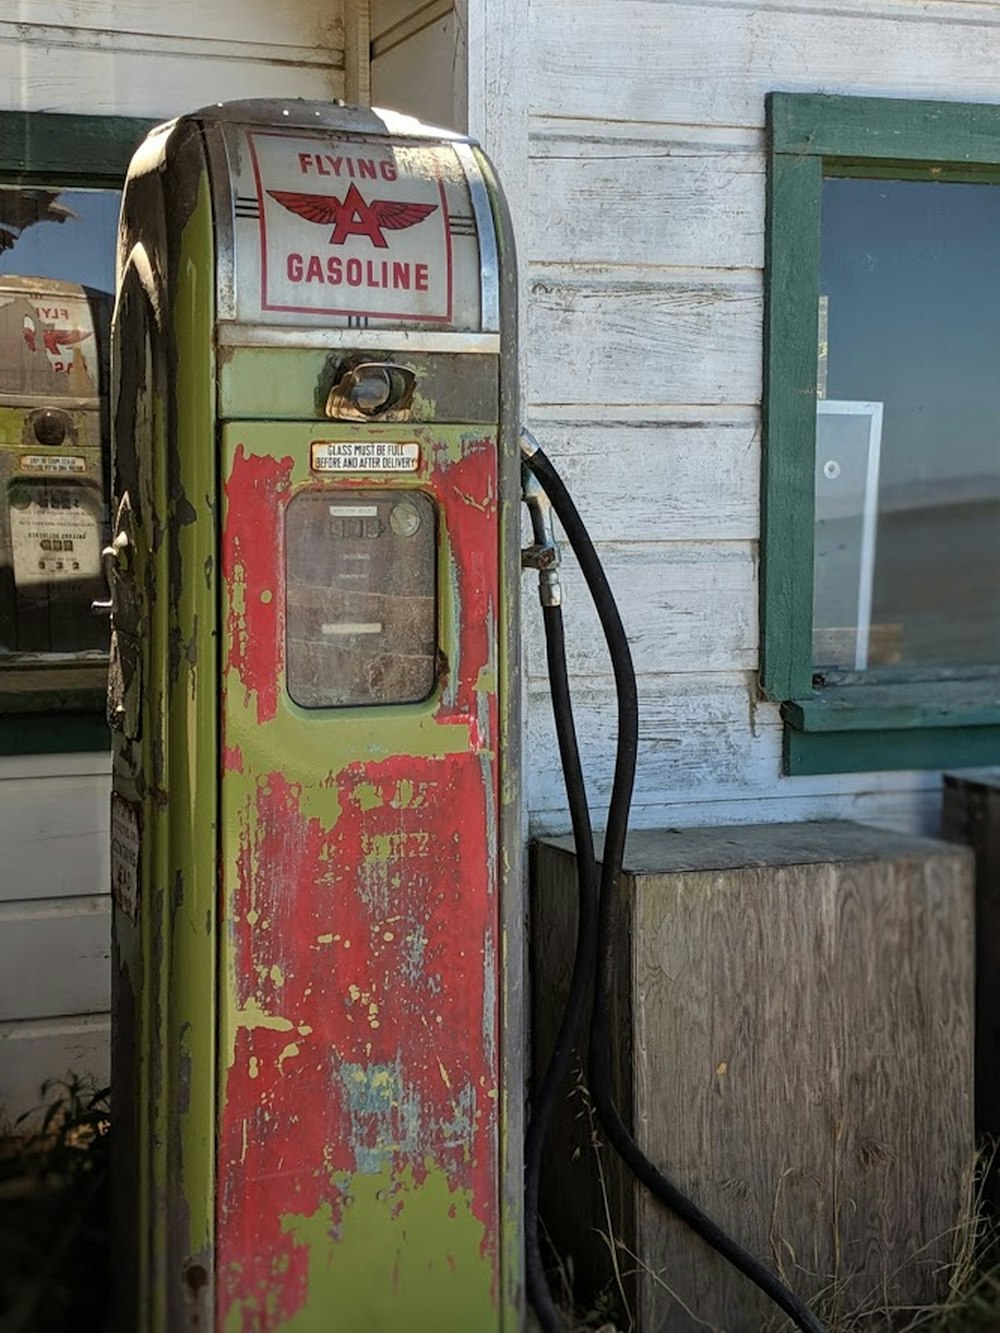 Flying Gasoline has pump by wooden housde